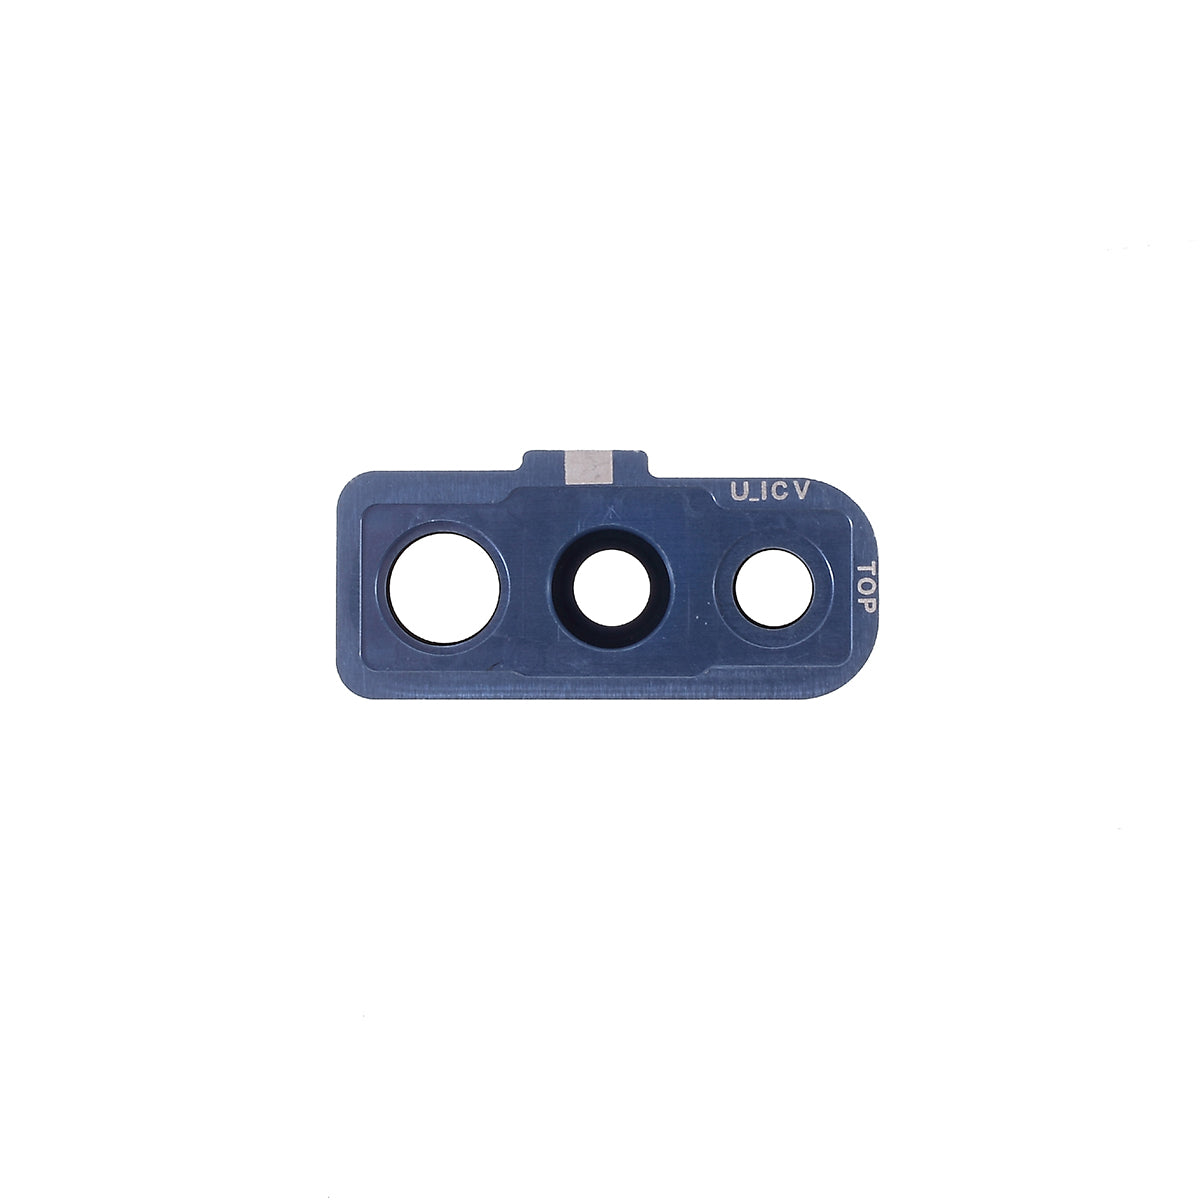 OEM Rear Camera Lens Ring Cover Replacement for Samsung Galaxy A70 SM-A705 - Blue